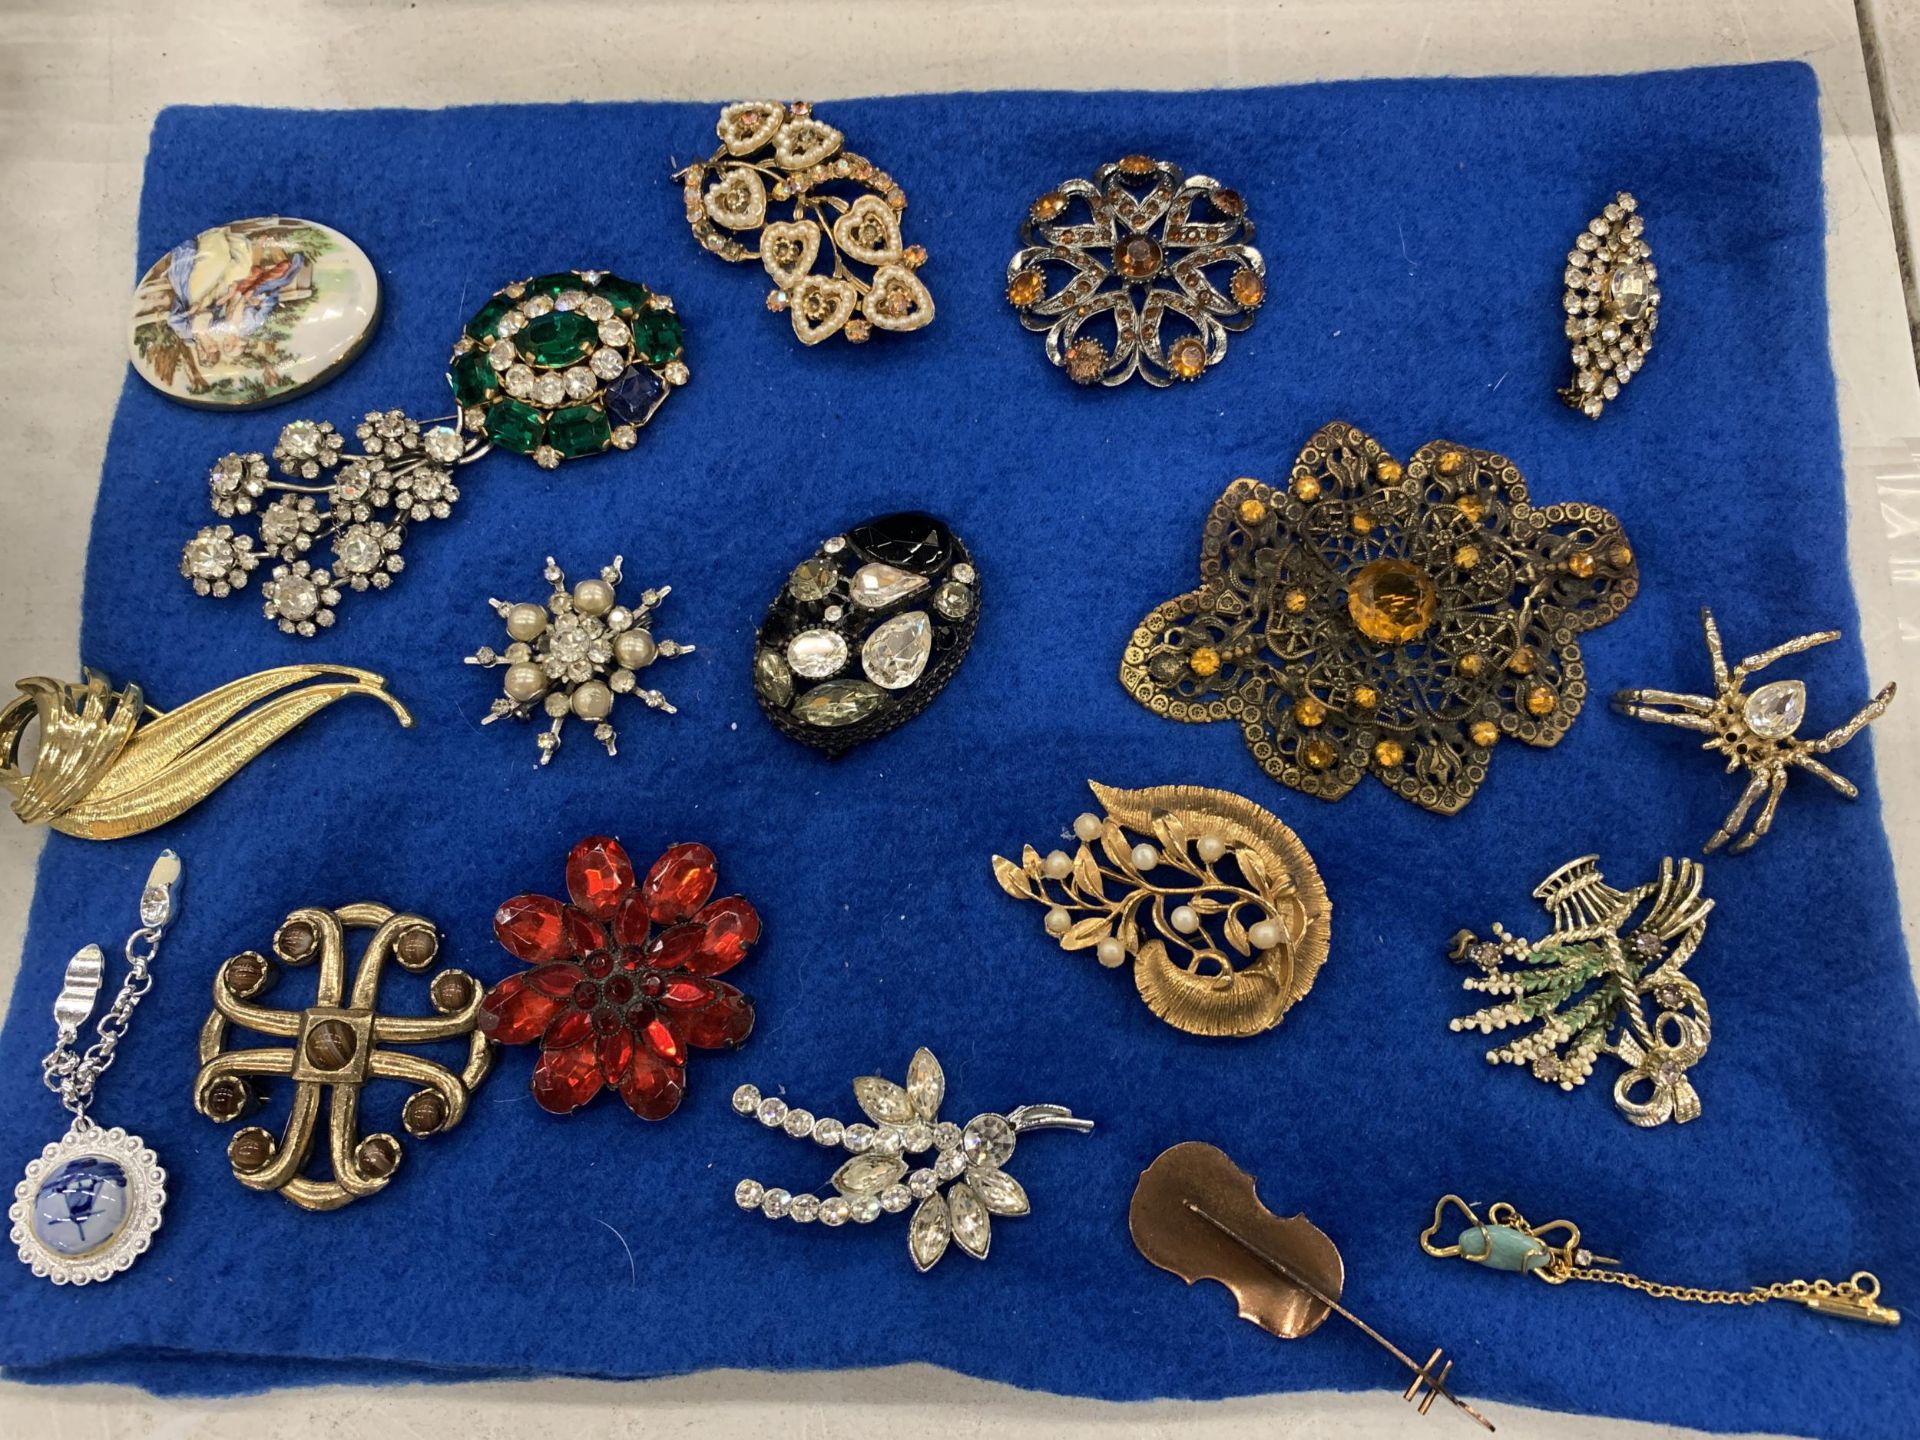 A QUANTITY OF VINTAGE BROOCHES - 19 IN TOTAL